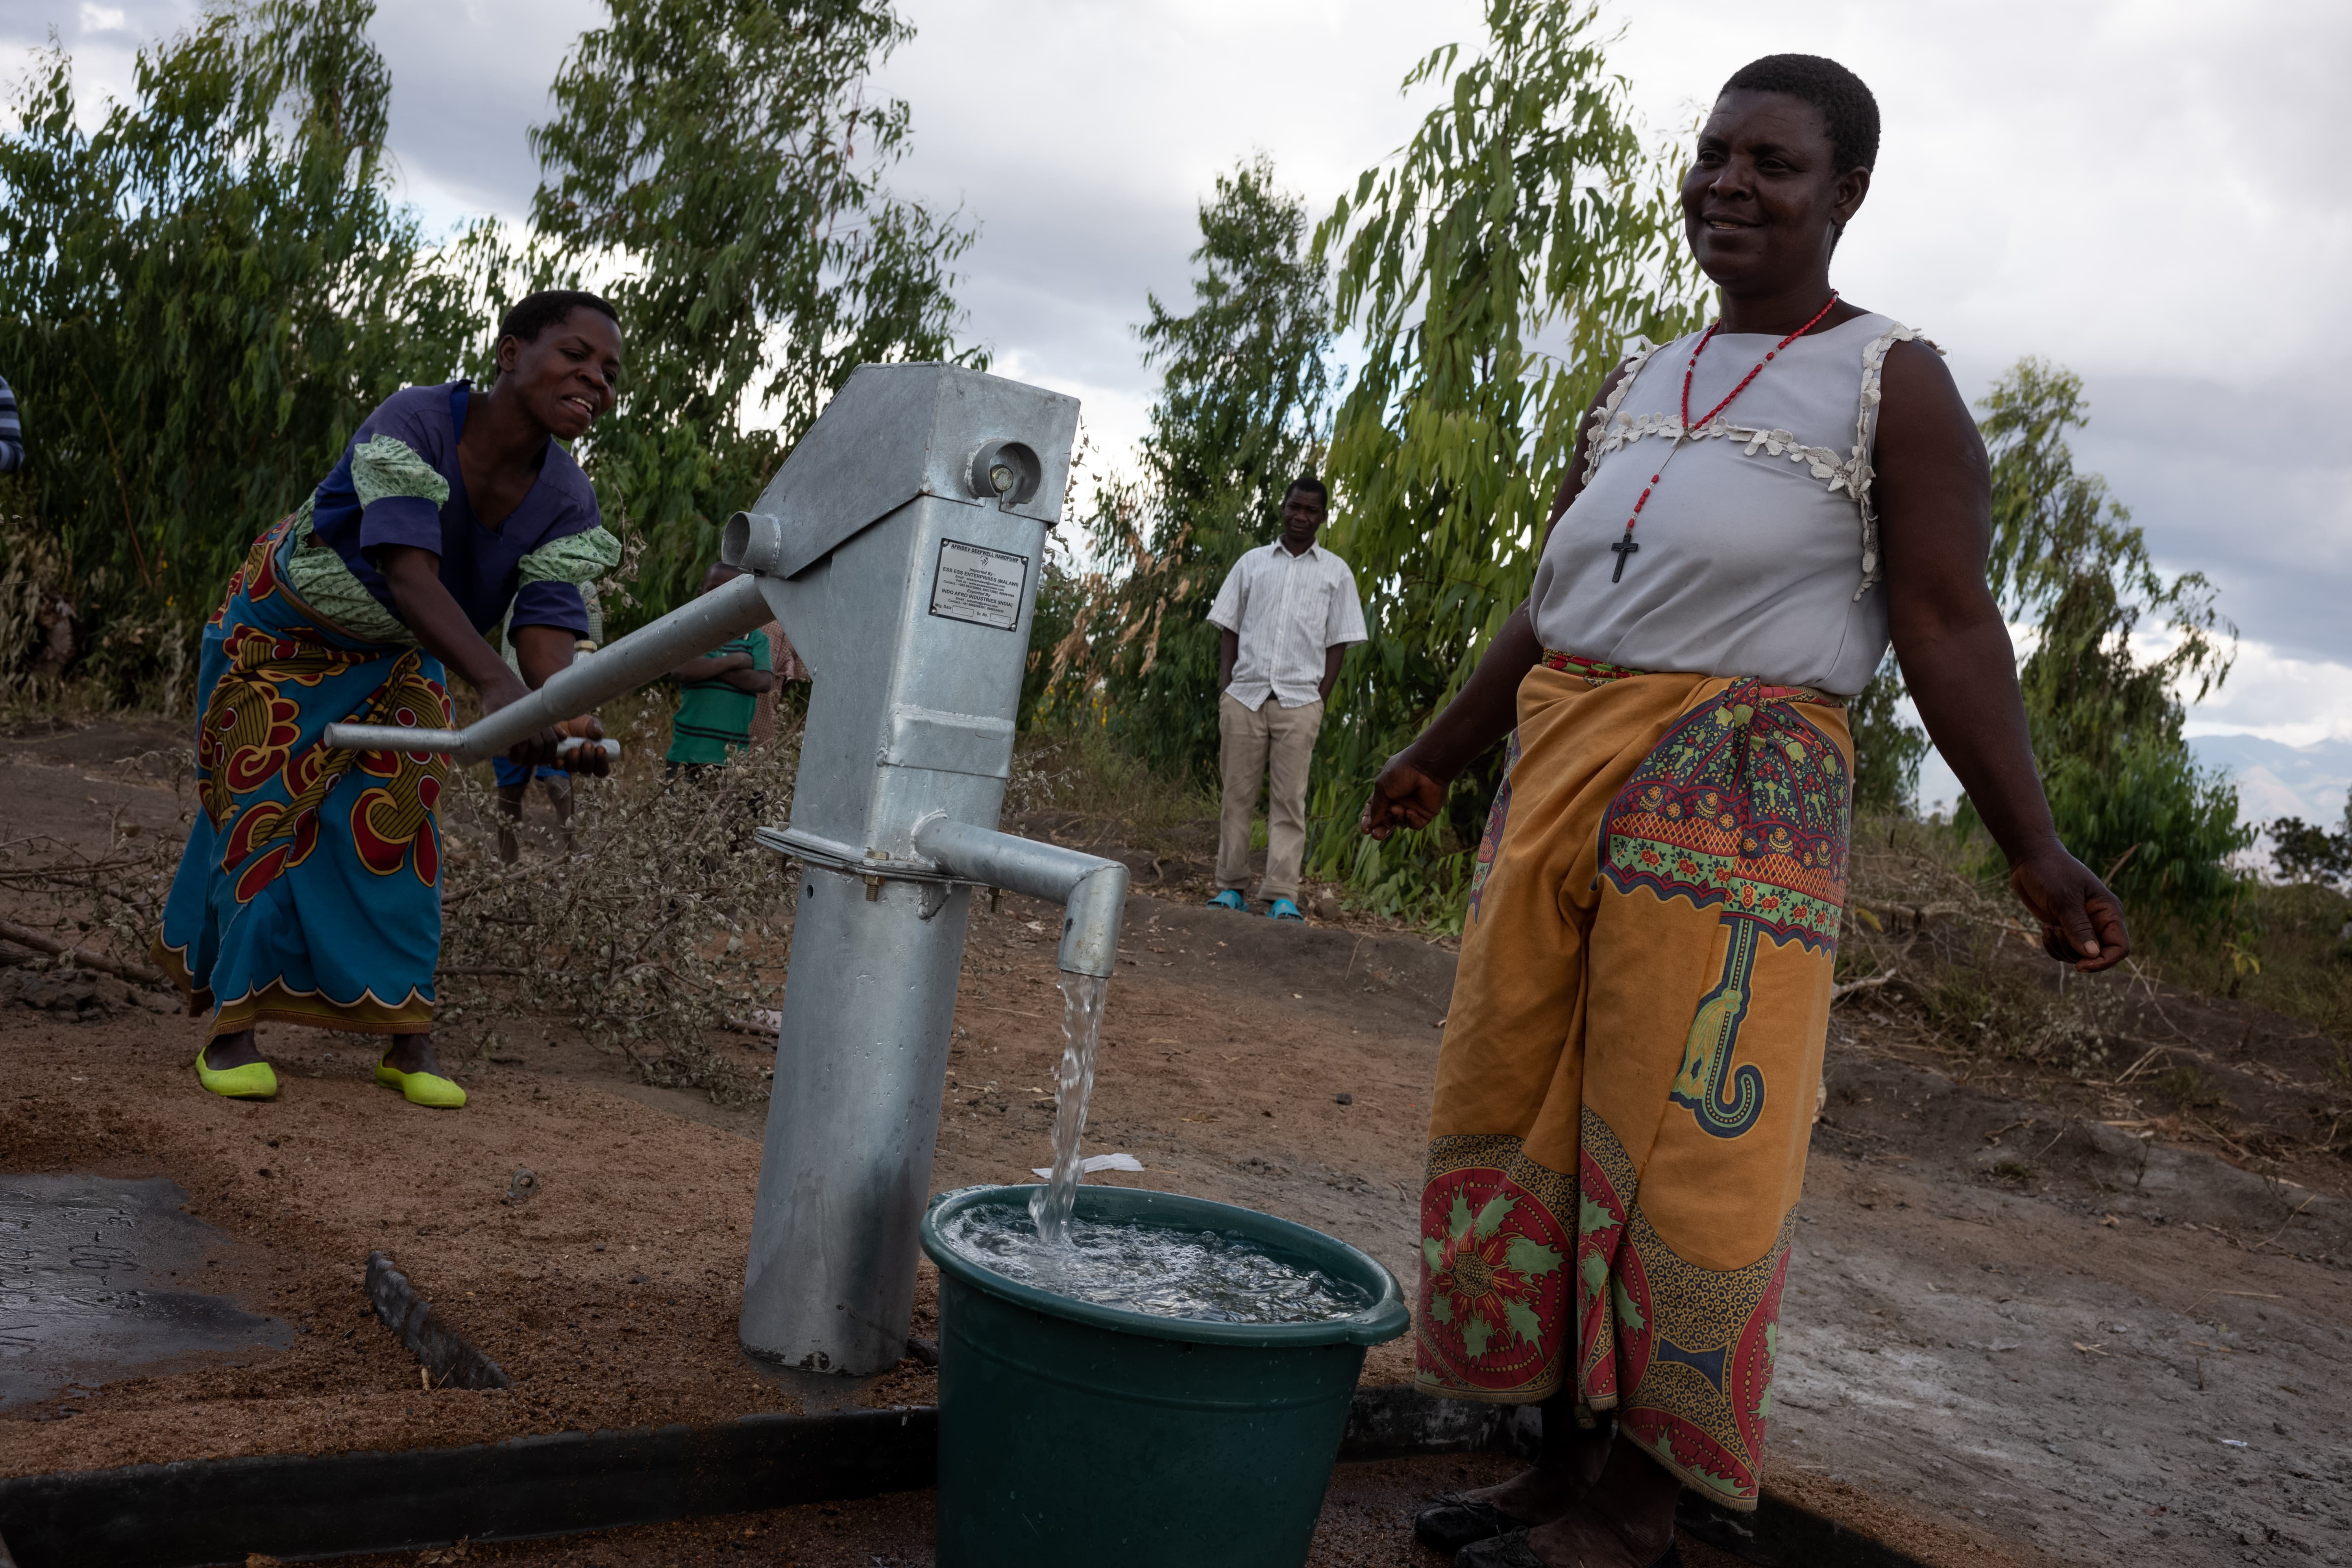 Mary Gawani (left), 32, and Mary Kamanga (right), 51, collecting water at a borehole constructed by Oxfam in Gwembere Village, Phalombe District, southern Malawi. (Photo: Ko Chung Ming / Oxfam Volunteer Photographer)